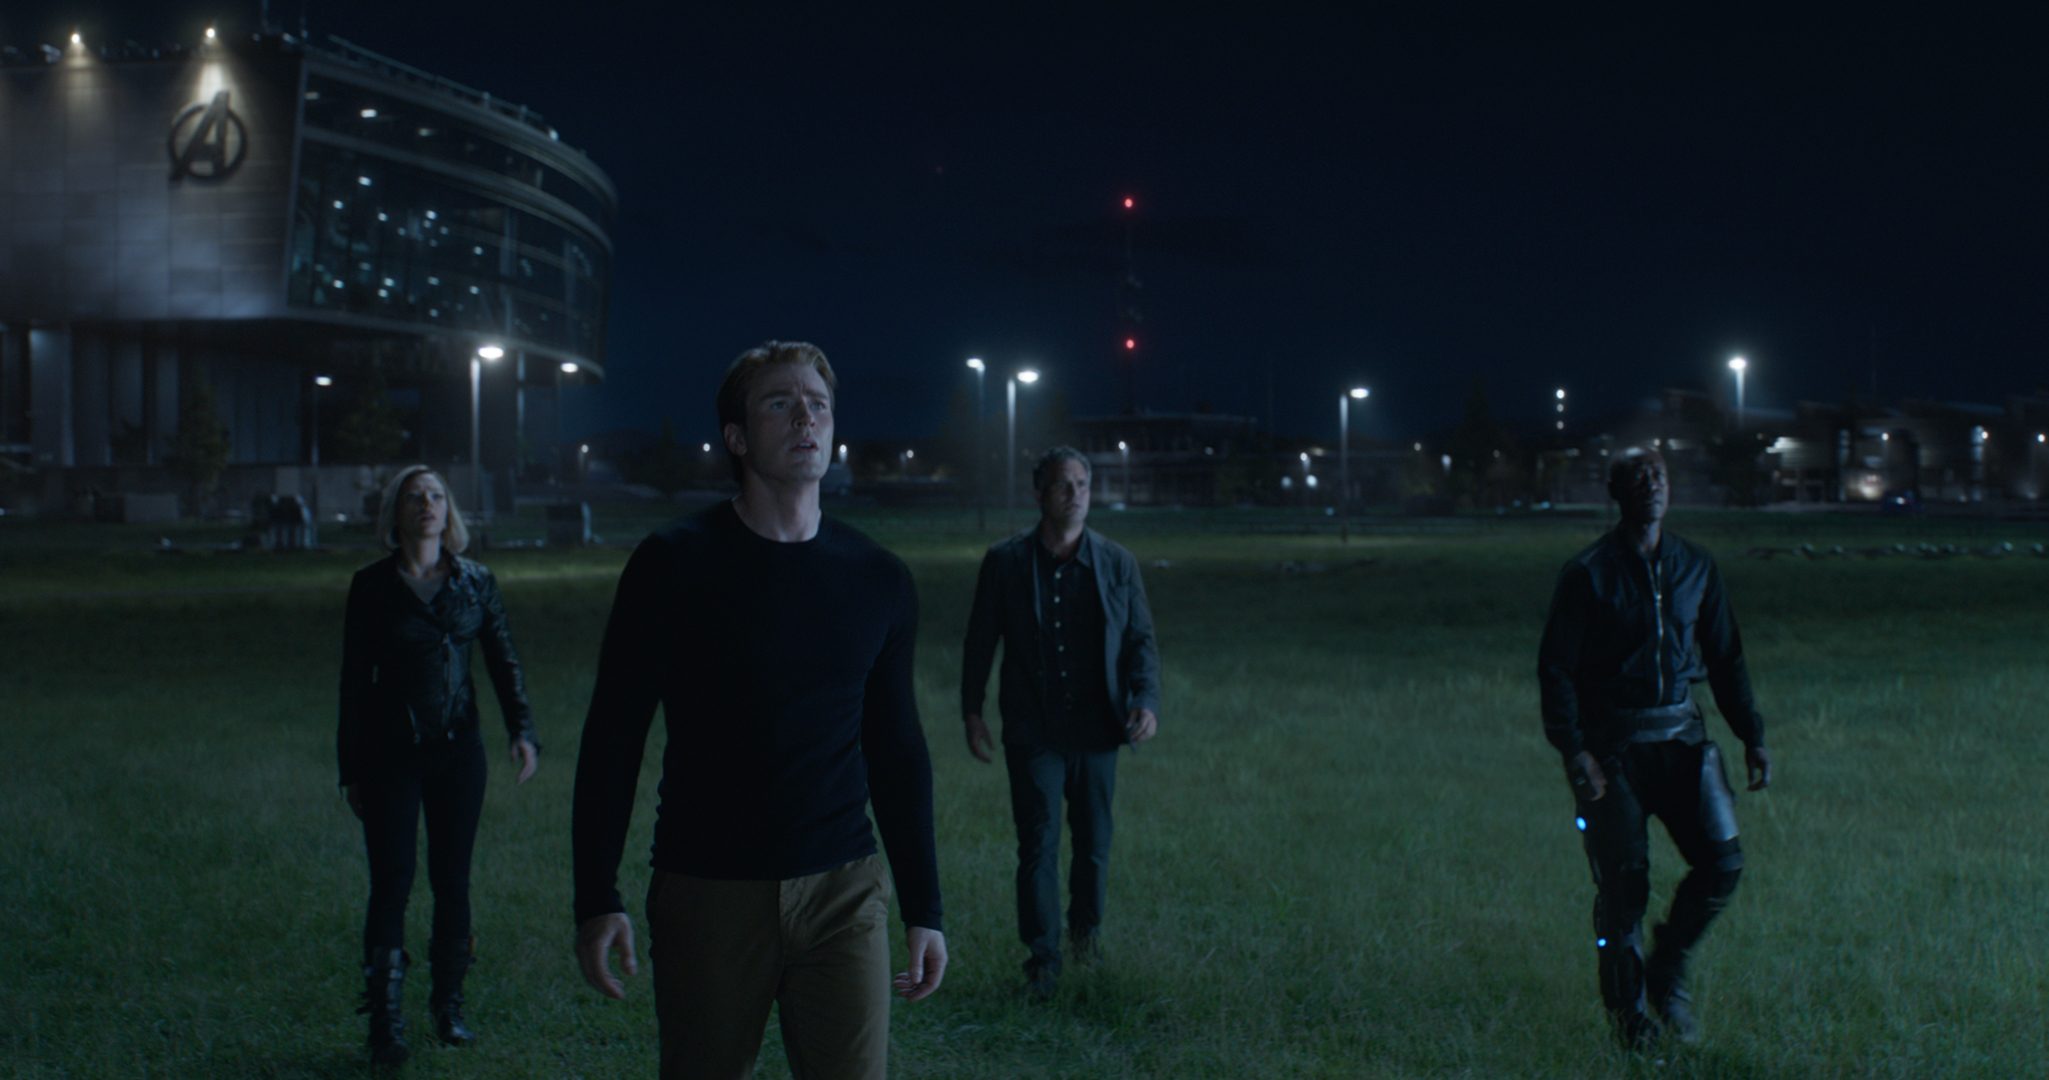 ‘Avengers: Endgame’ is now the highest grossing film in Philippine box office history